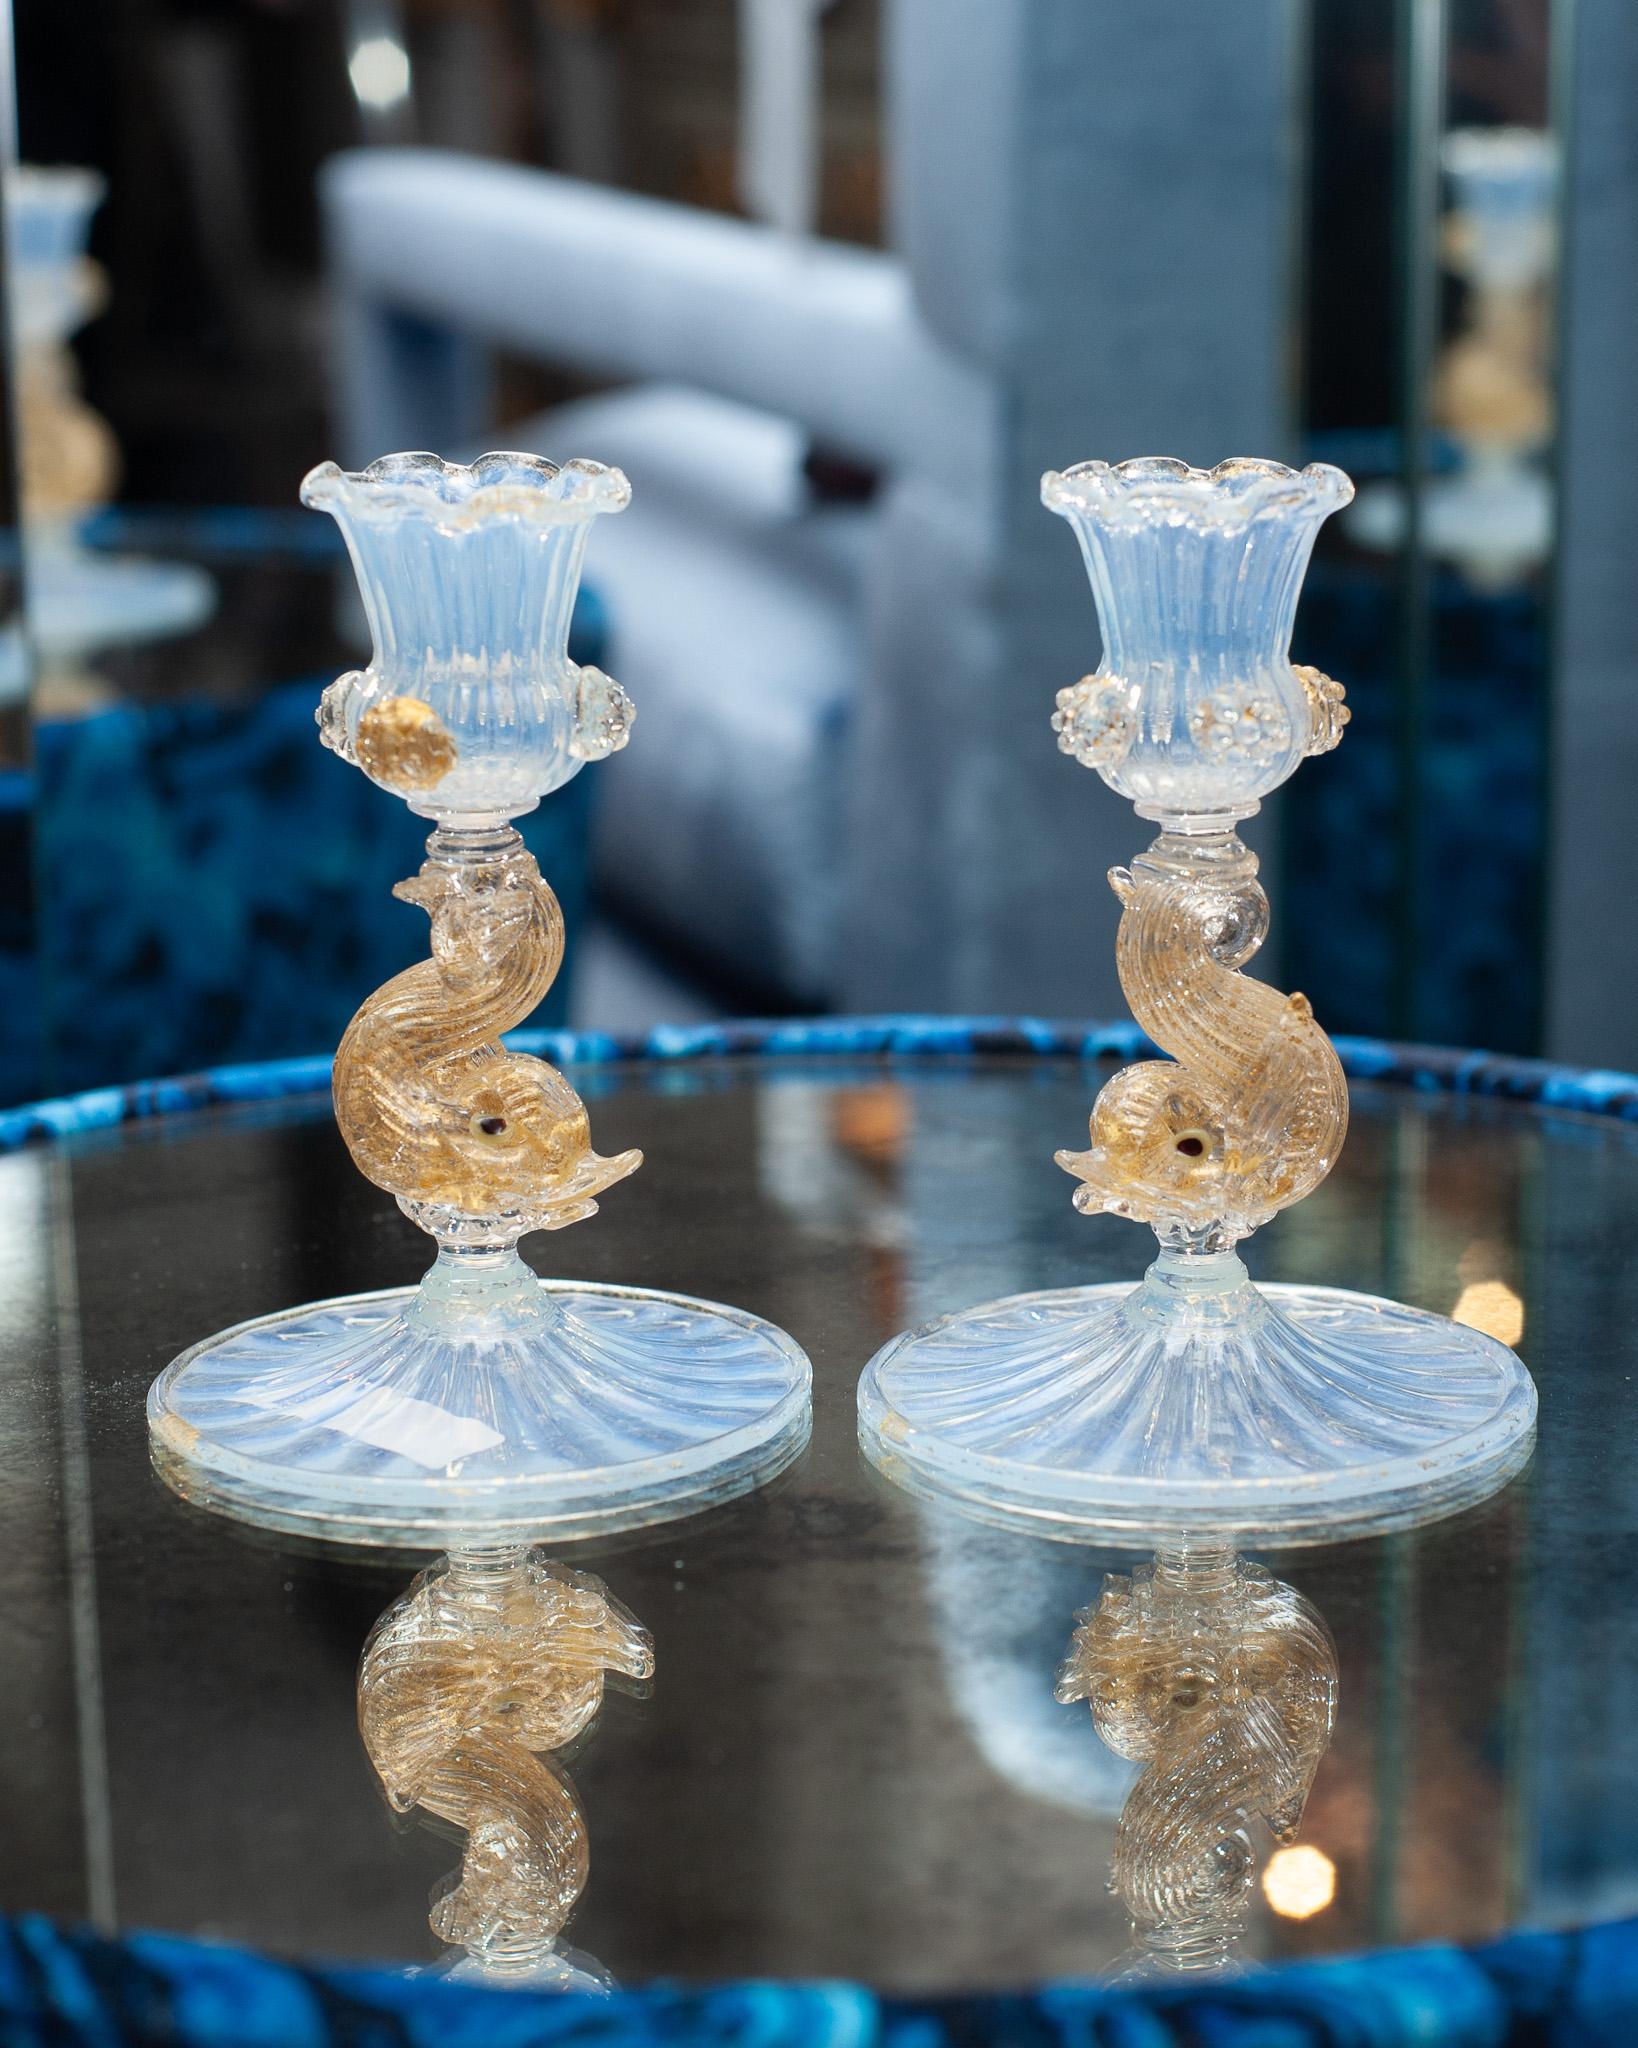 A stunning pair of antique Venetian murano glass candlesticks in opalescent glass and gold leaf with dolphin motif. They are a perfect smaller size candlestick and are beautifully made. These candlesticks would make a gorgeous addition to any table. 